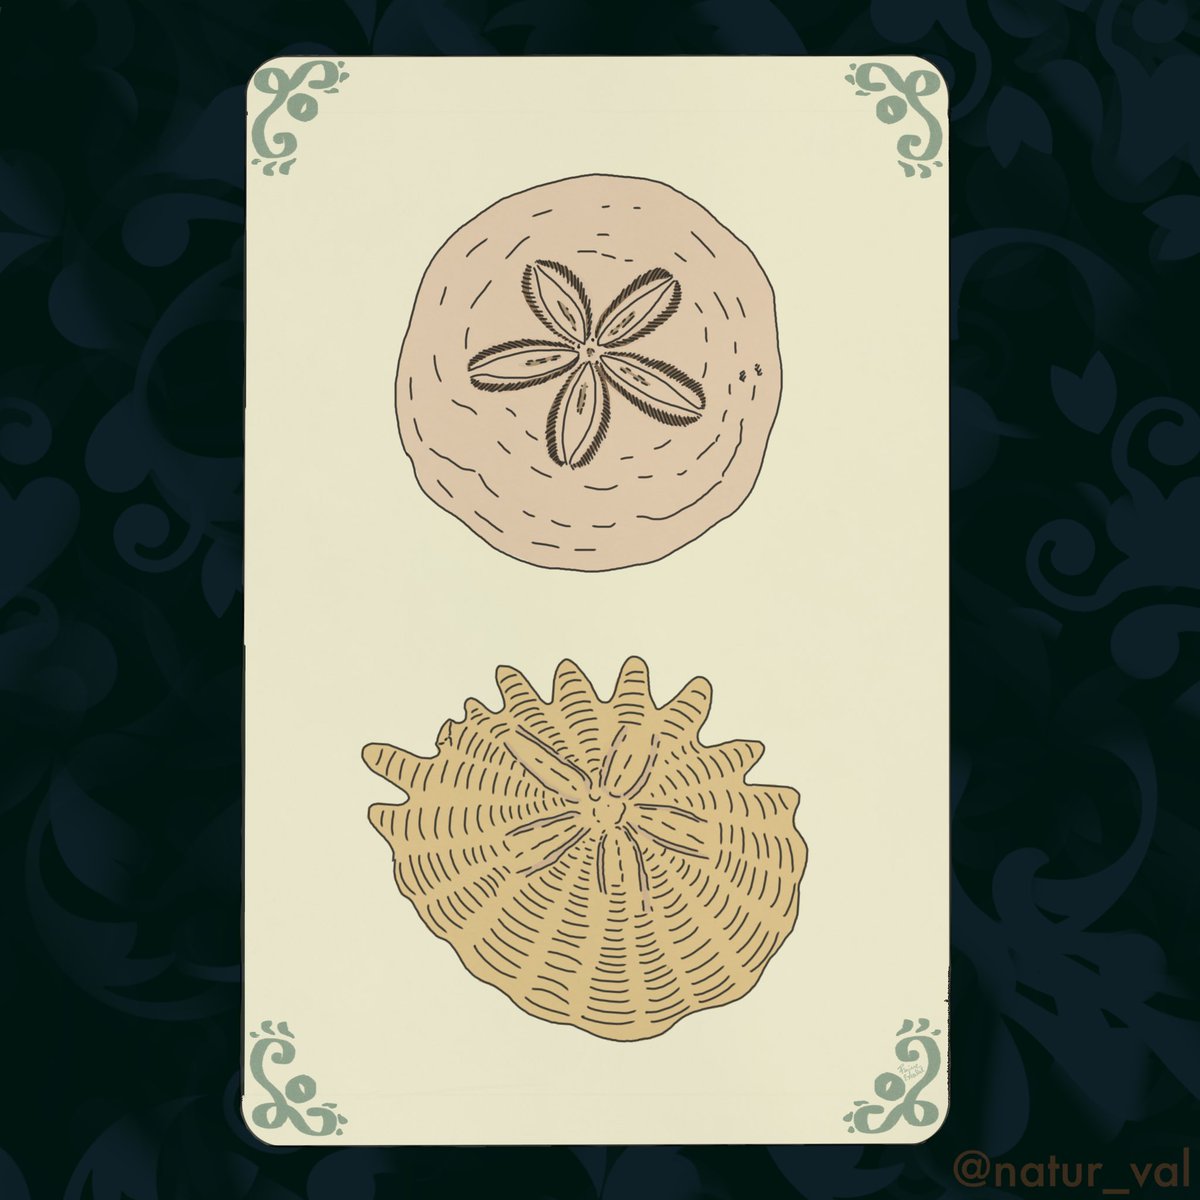 Tarots Before Time - Deniers. The suit of Pentacles. I chose “sand dollars” fossils, i.e. echinoids of the Dendrasteridae family characterized by a rounded and flattened shape that resembles a coin. P.S. There are actually a couple of interlopers from other genres. 2: wealth